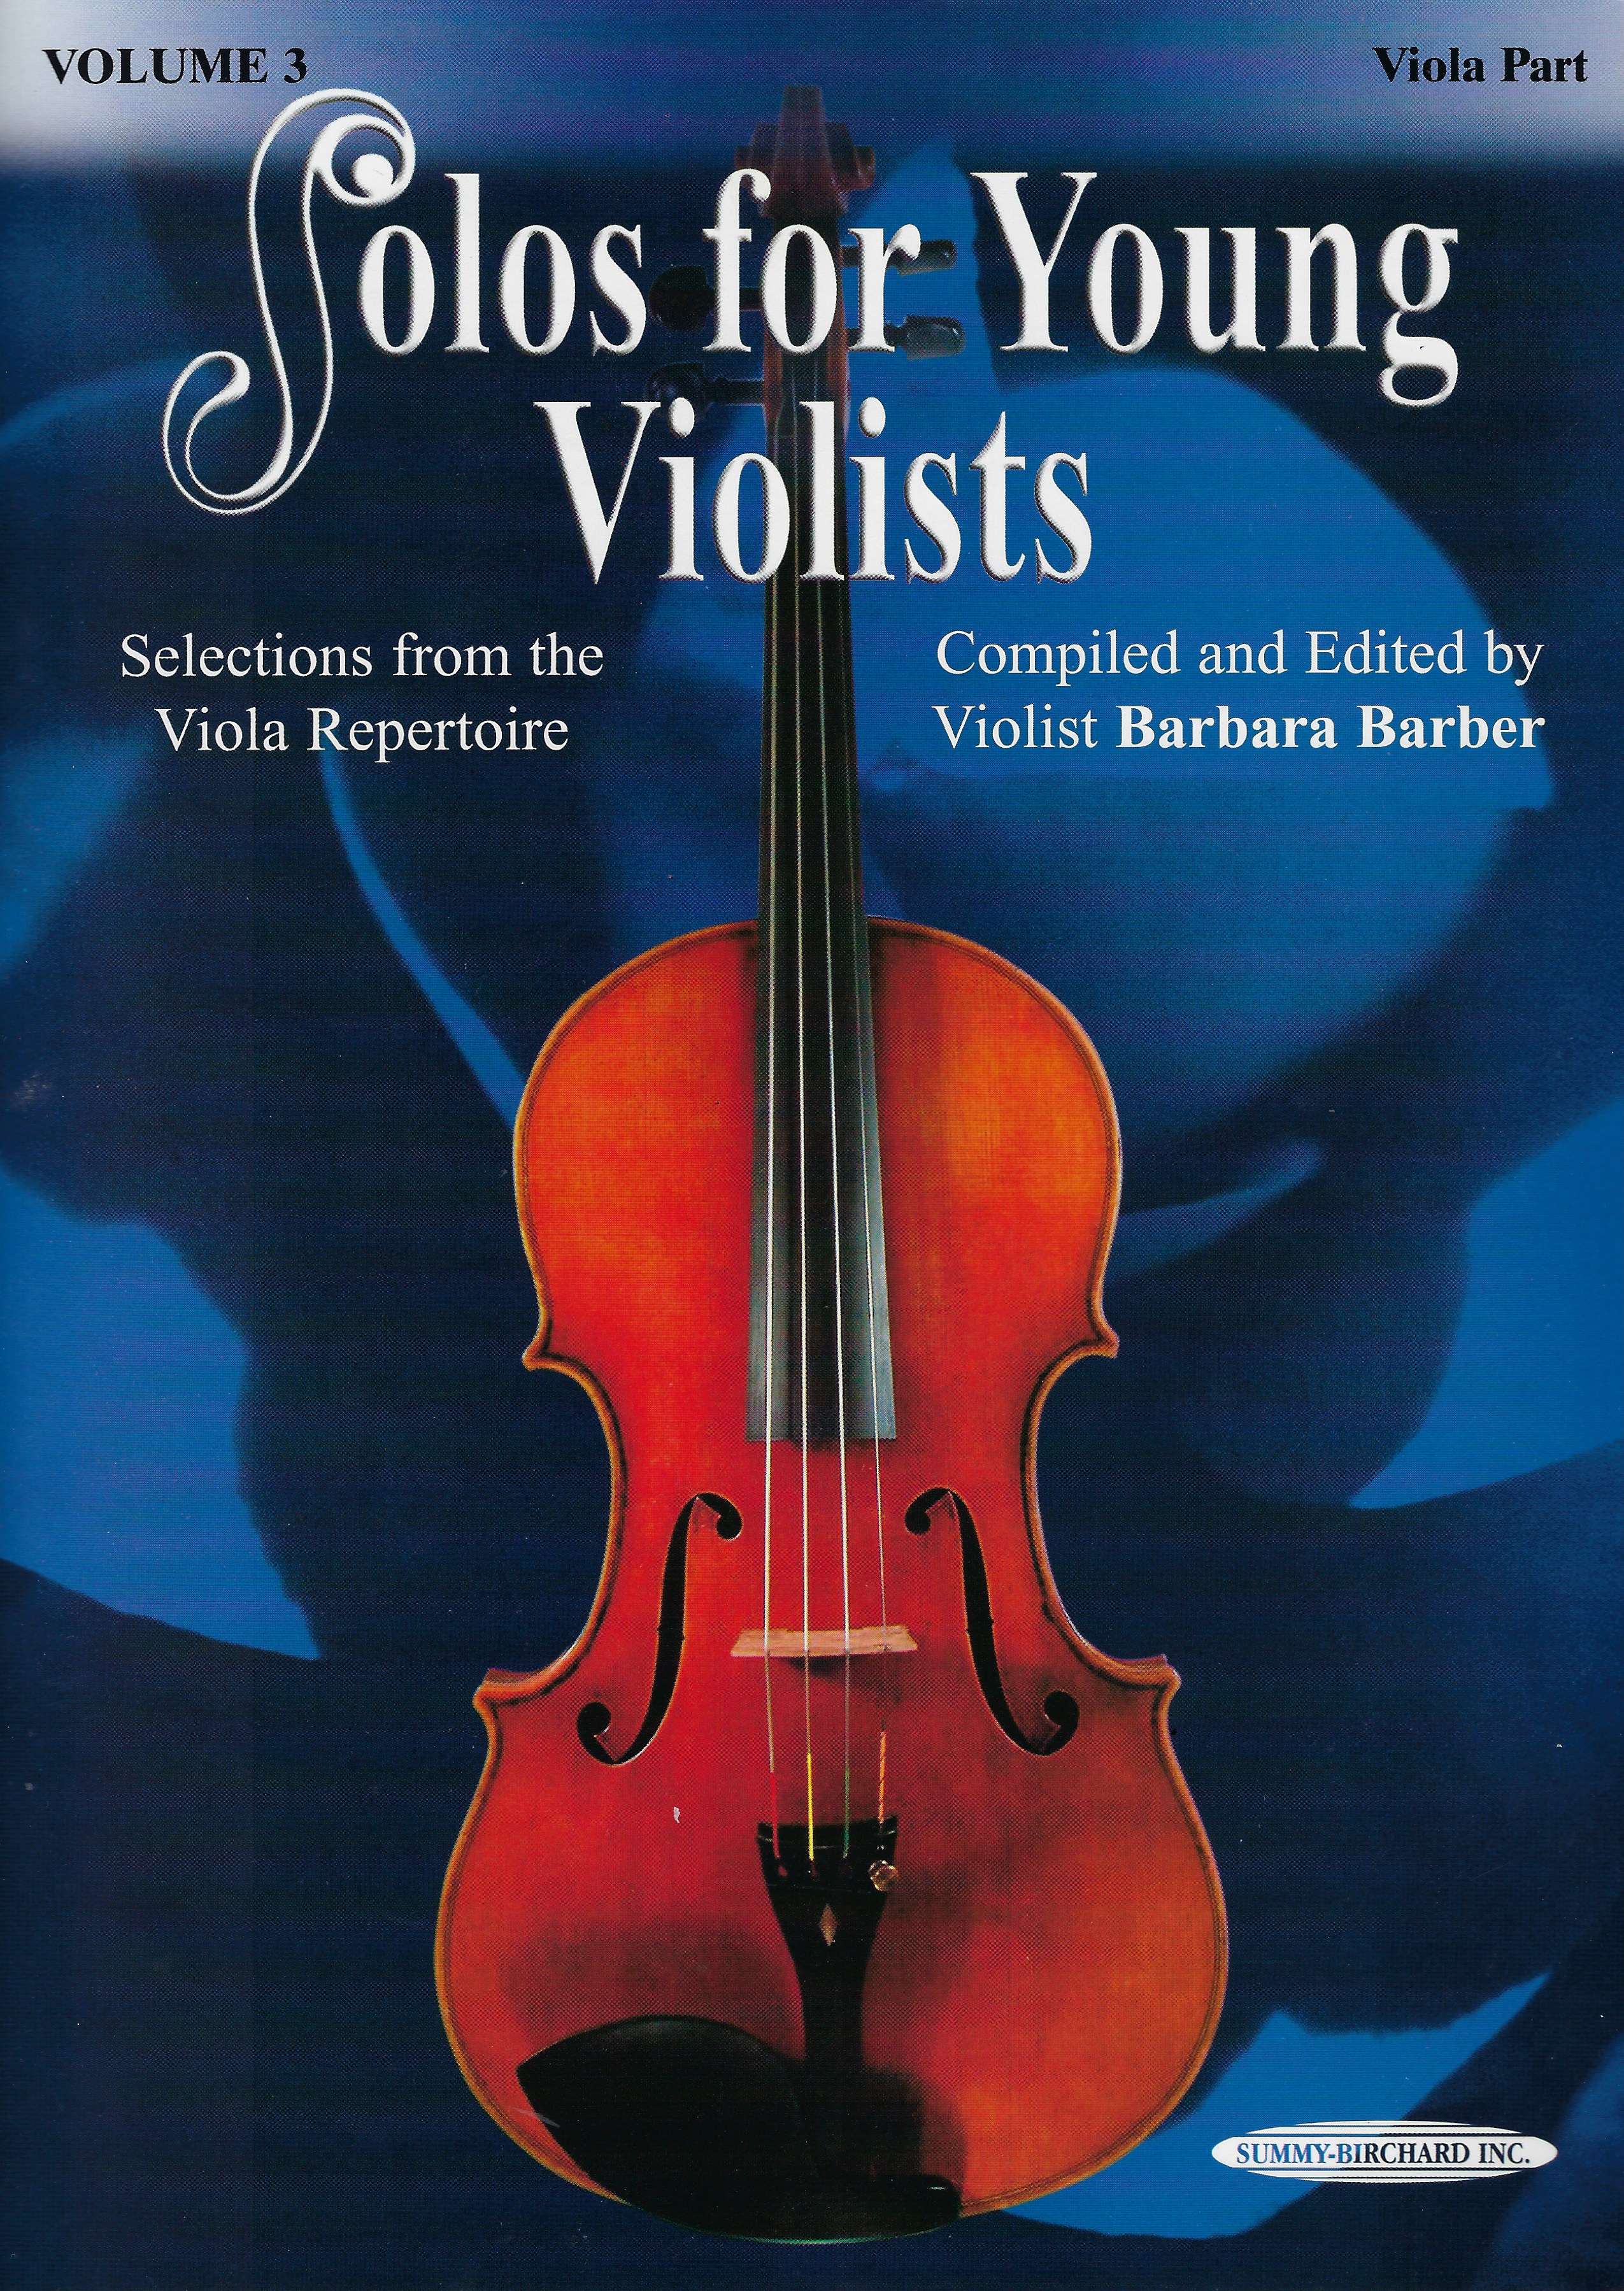 Solos for Young Violists vol. 3